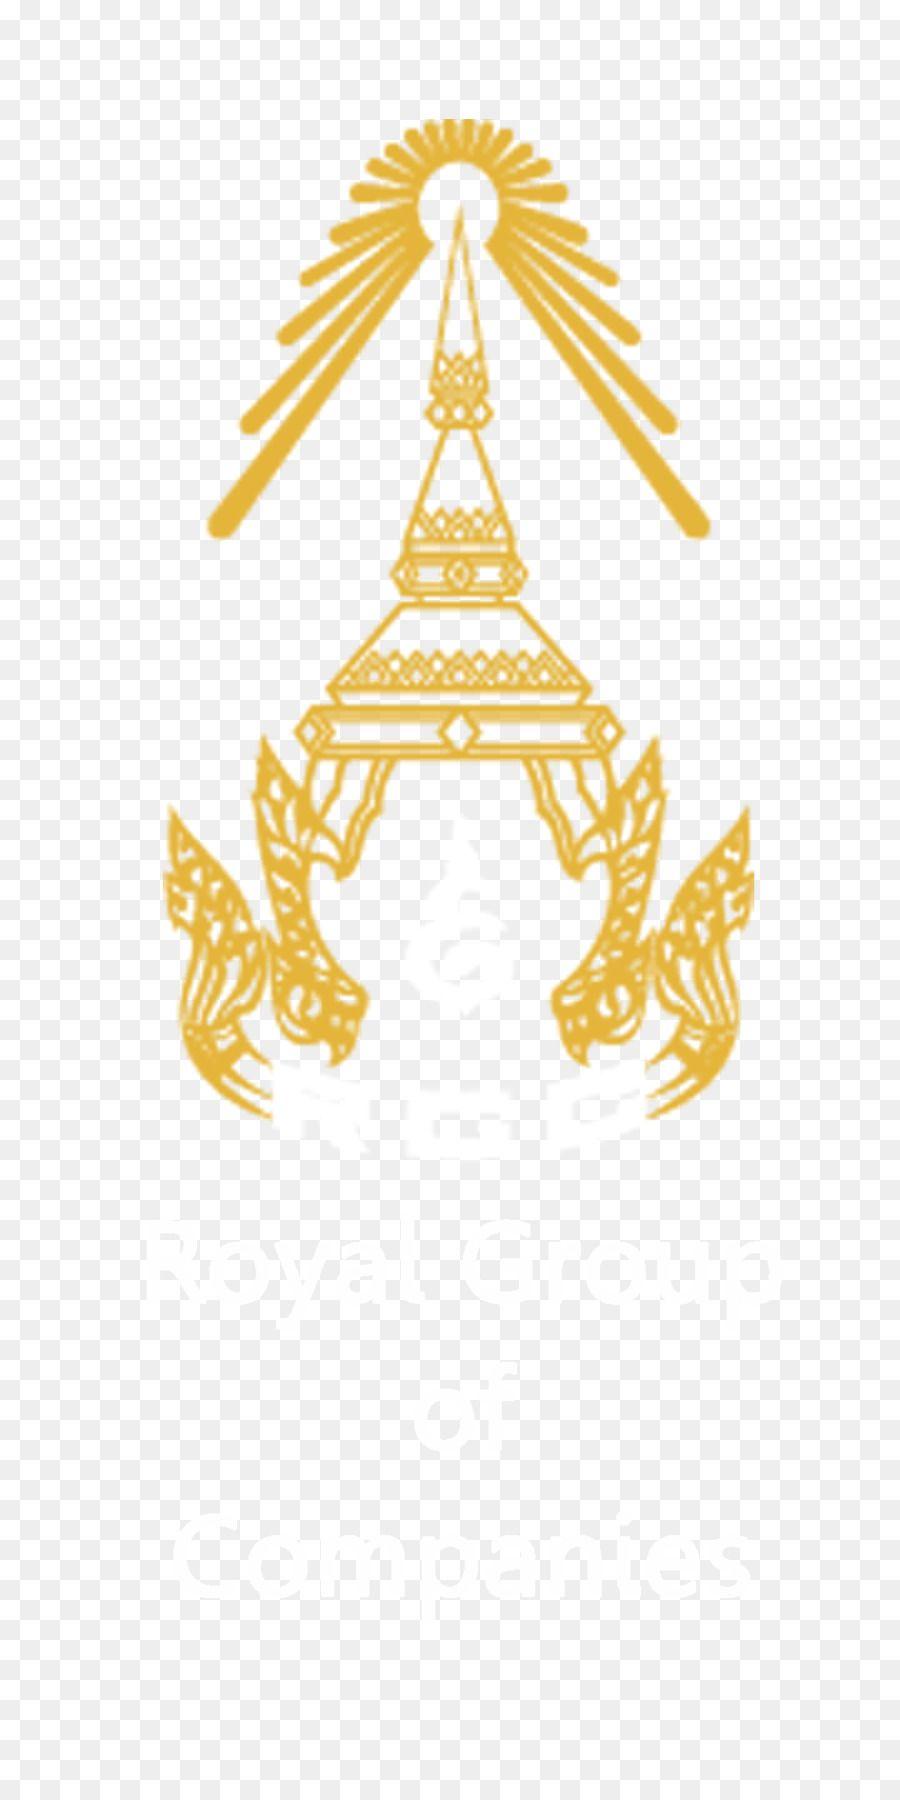 Conglomerate Logo - Cambodia The Royal Group Company Logo Conglomerate - others png ...